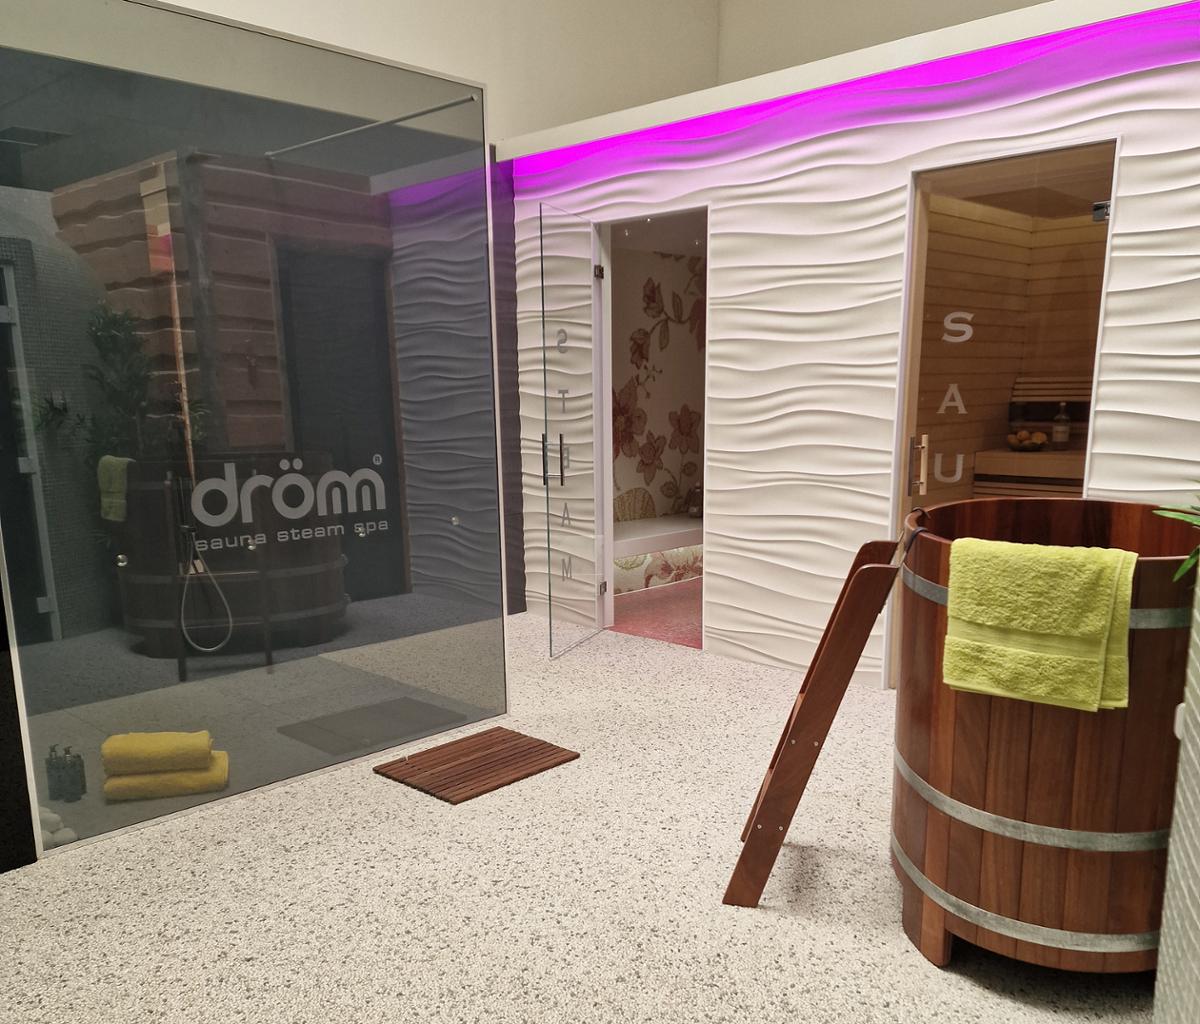 Dröm designs, supplies and installs projects throughout the UK, Europe and the Middle East
/ Dröm UK / Klafs